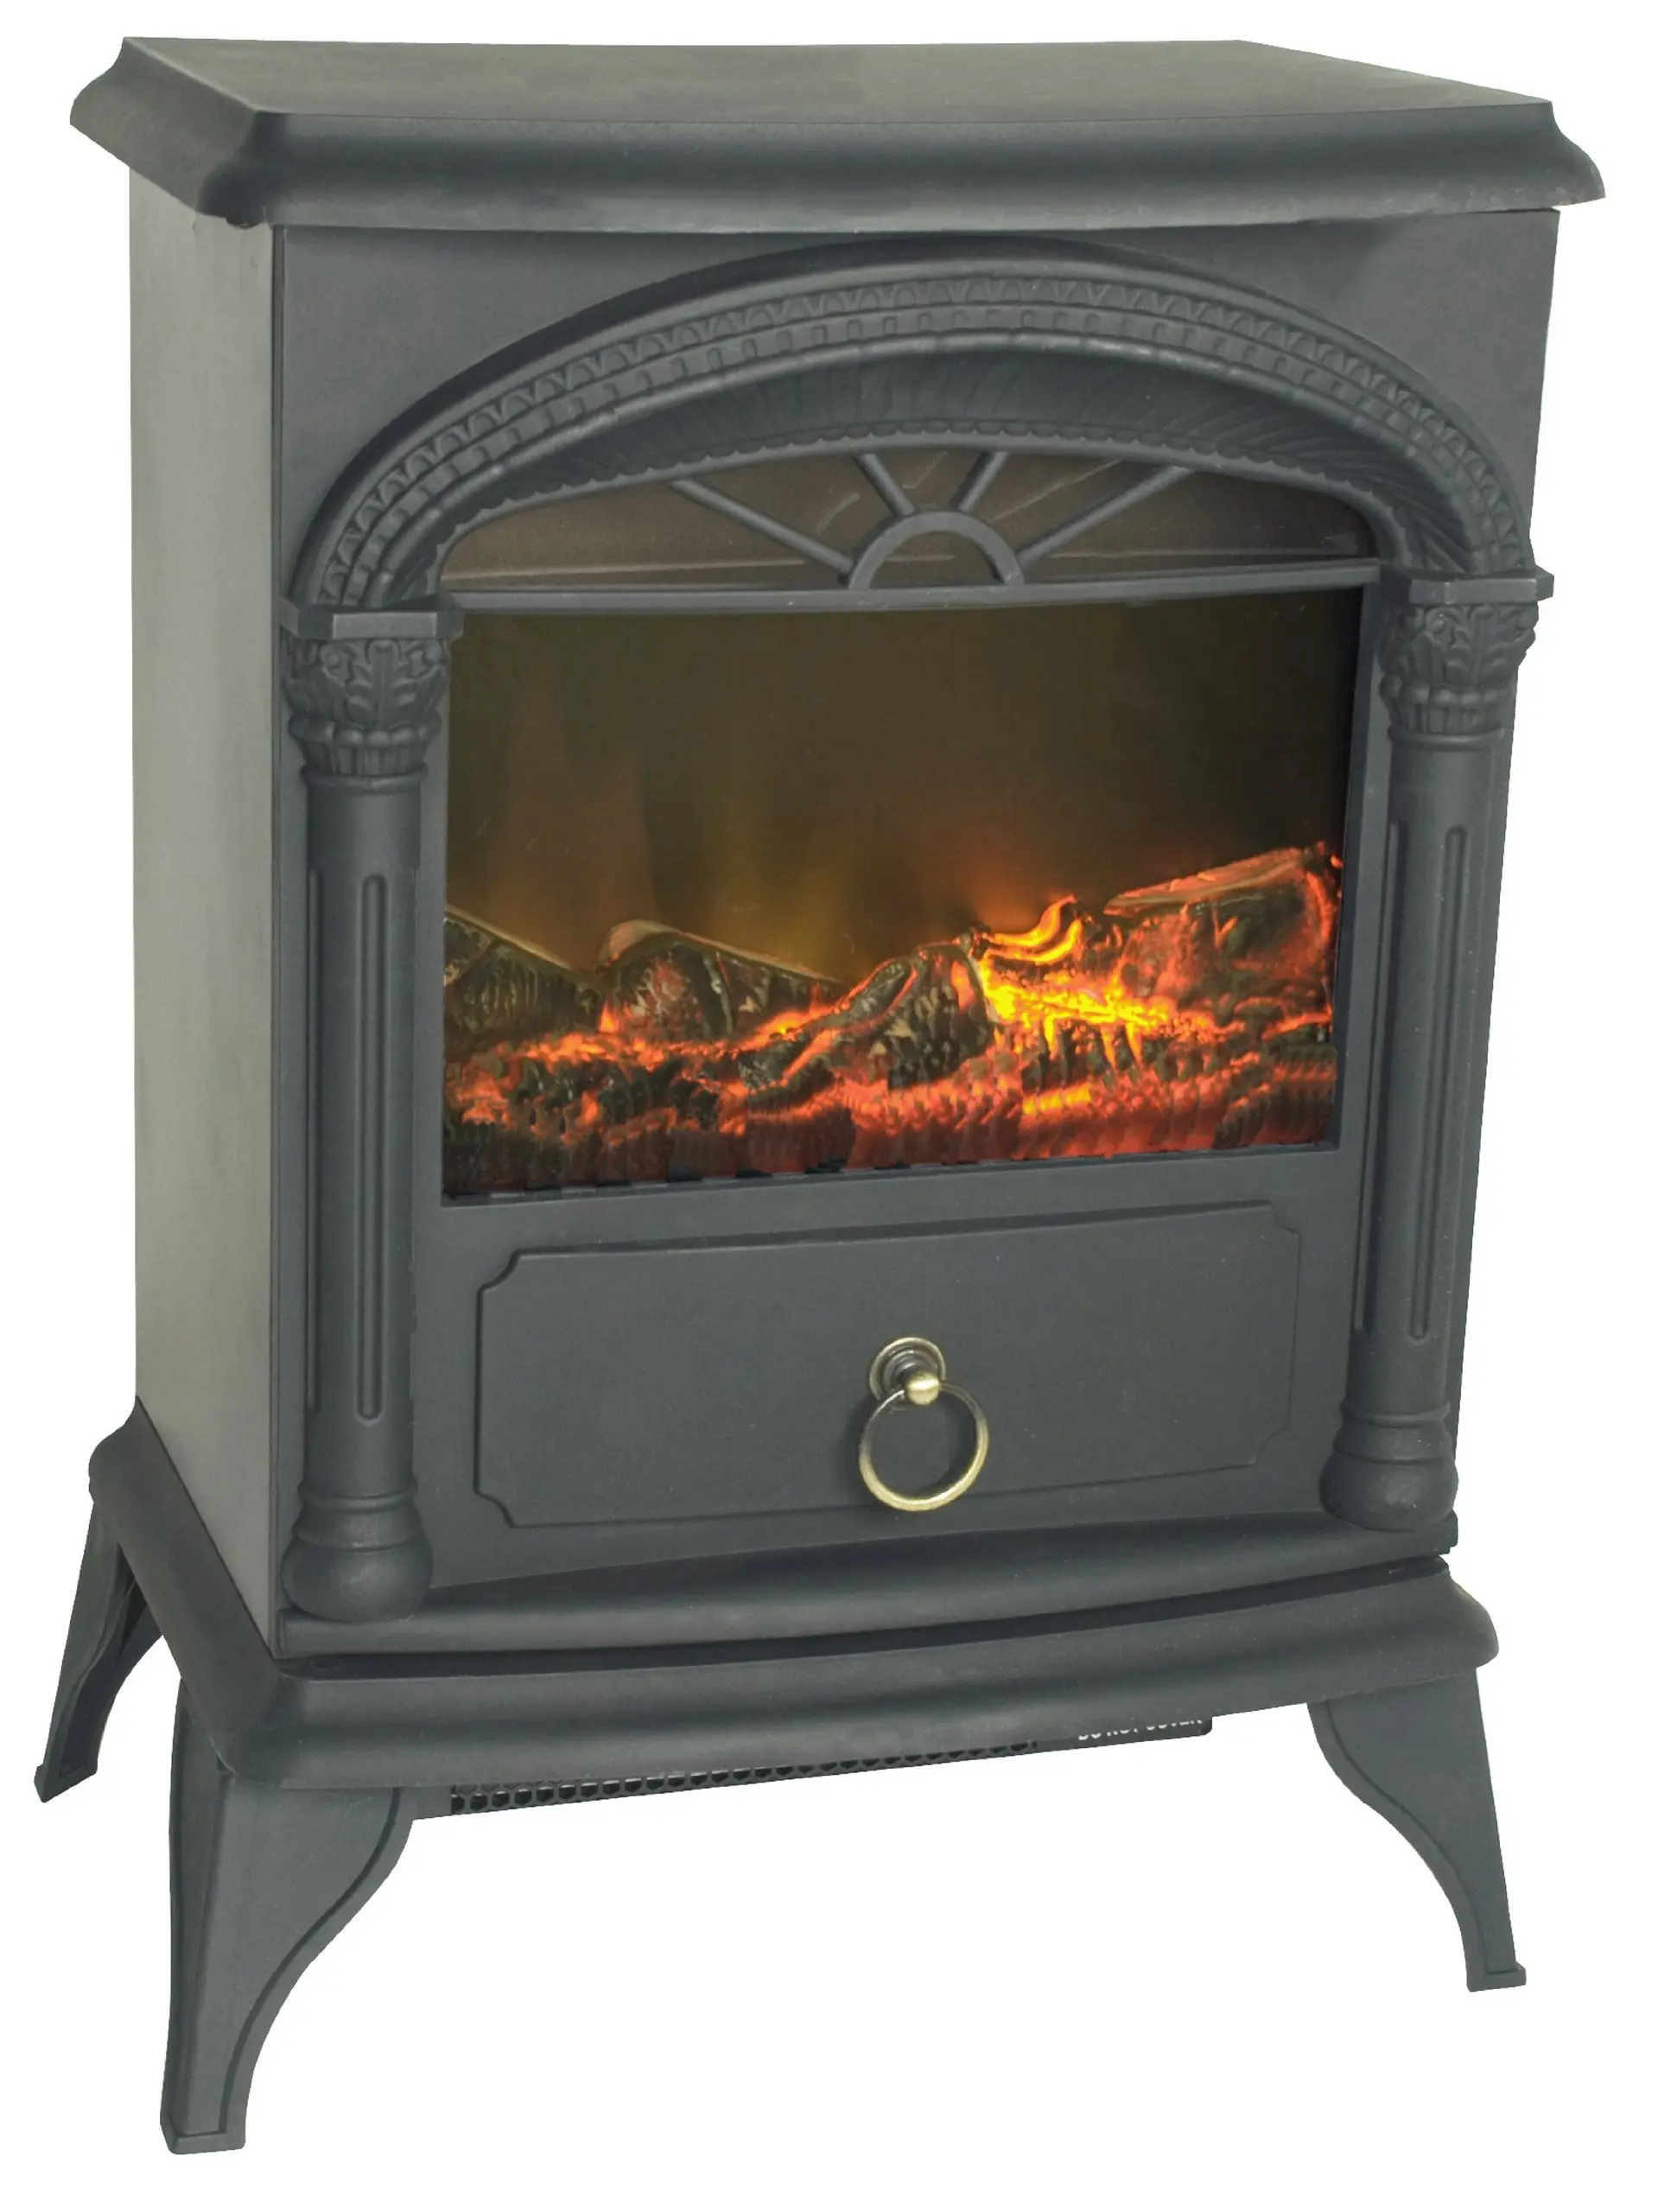 cheap-vernon-electric-fireplace-stove-find-vernon-electric-fireplace